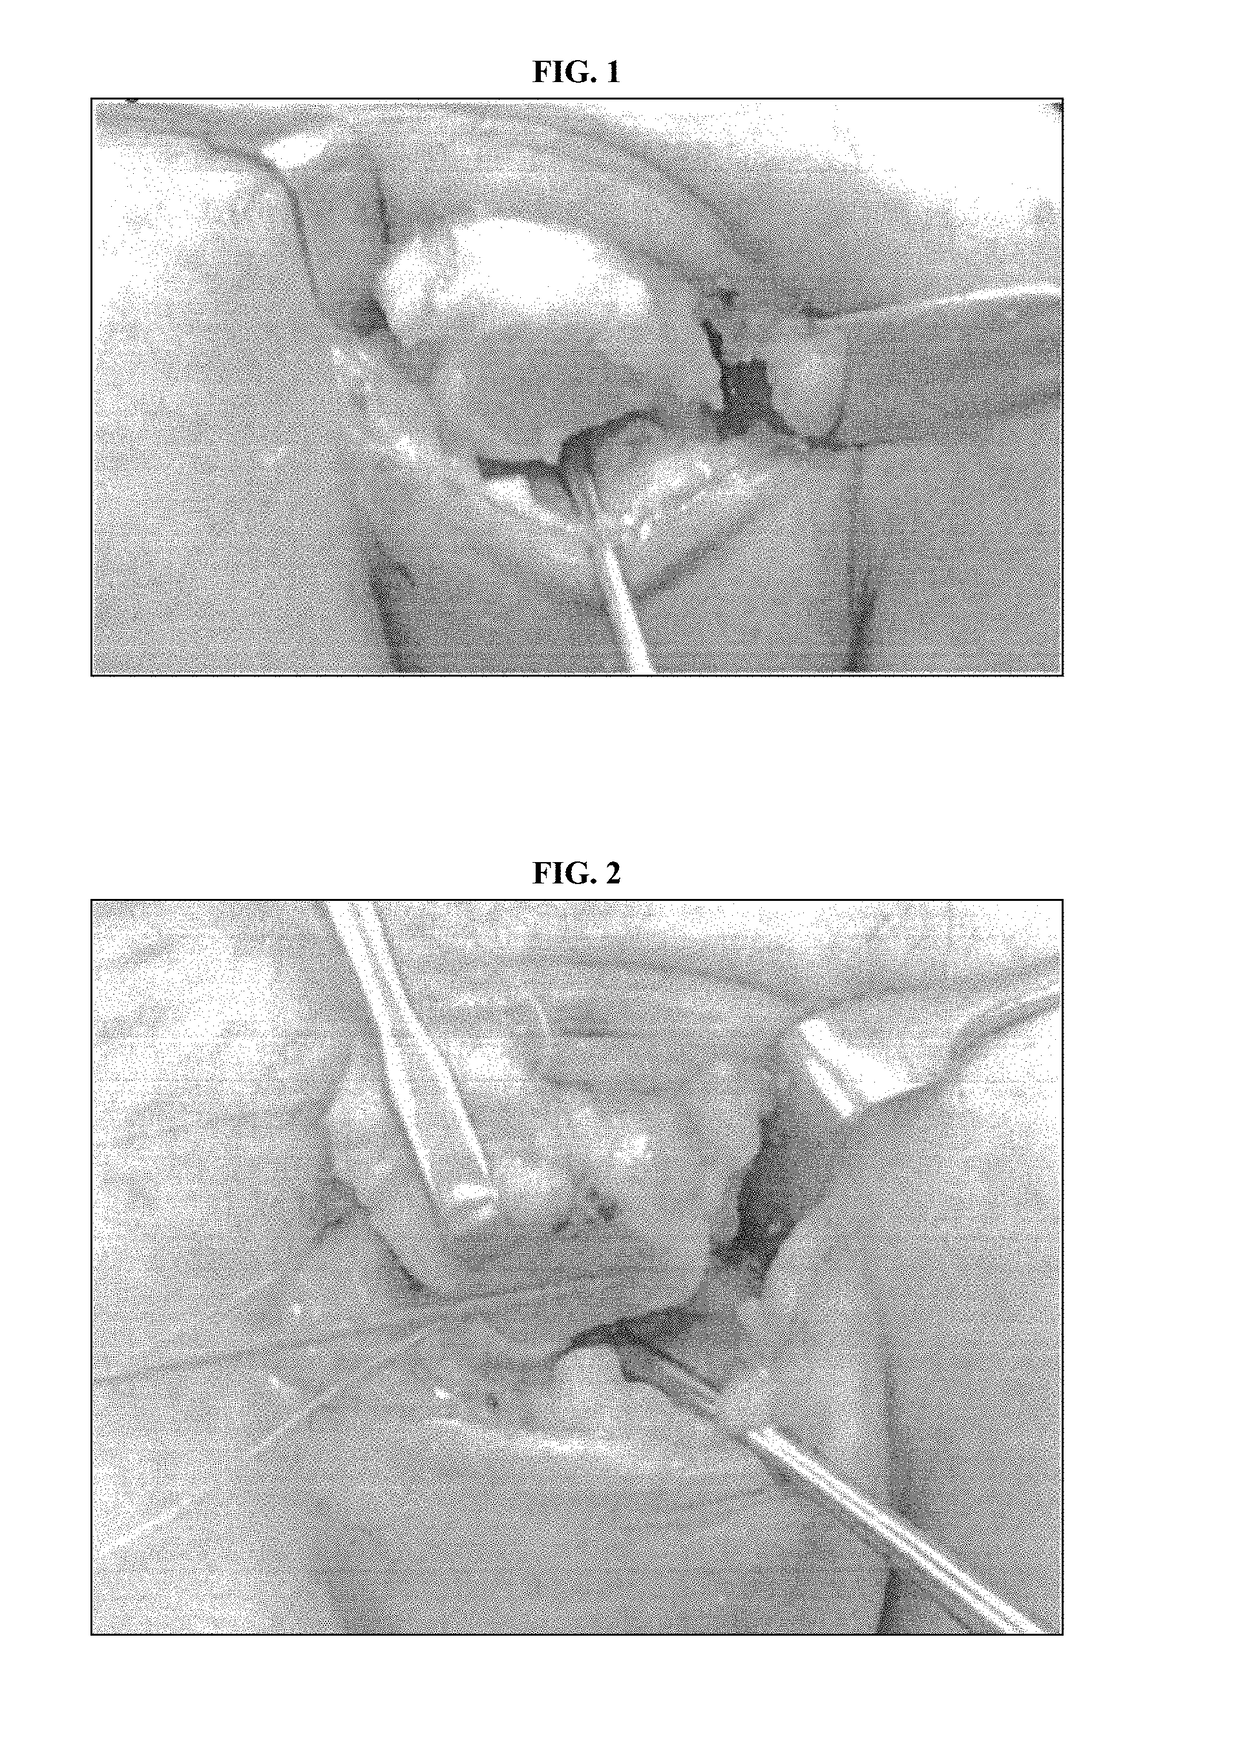 Meniscus for joint reconstruction